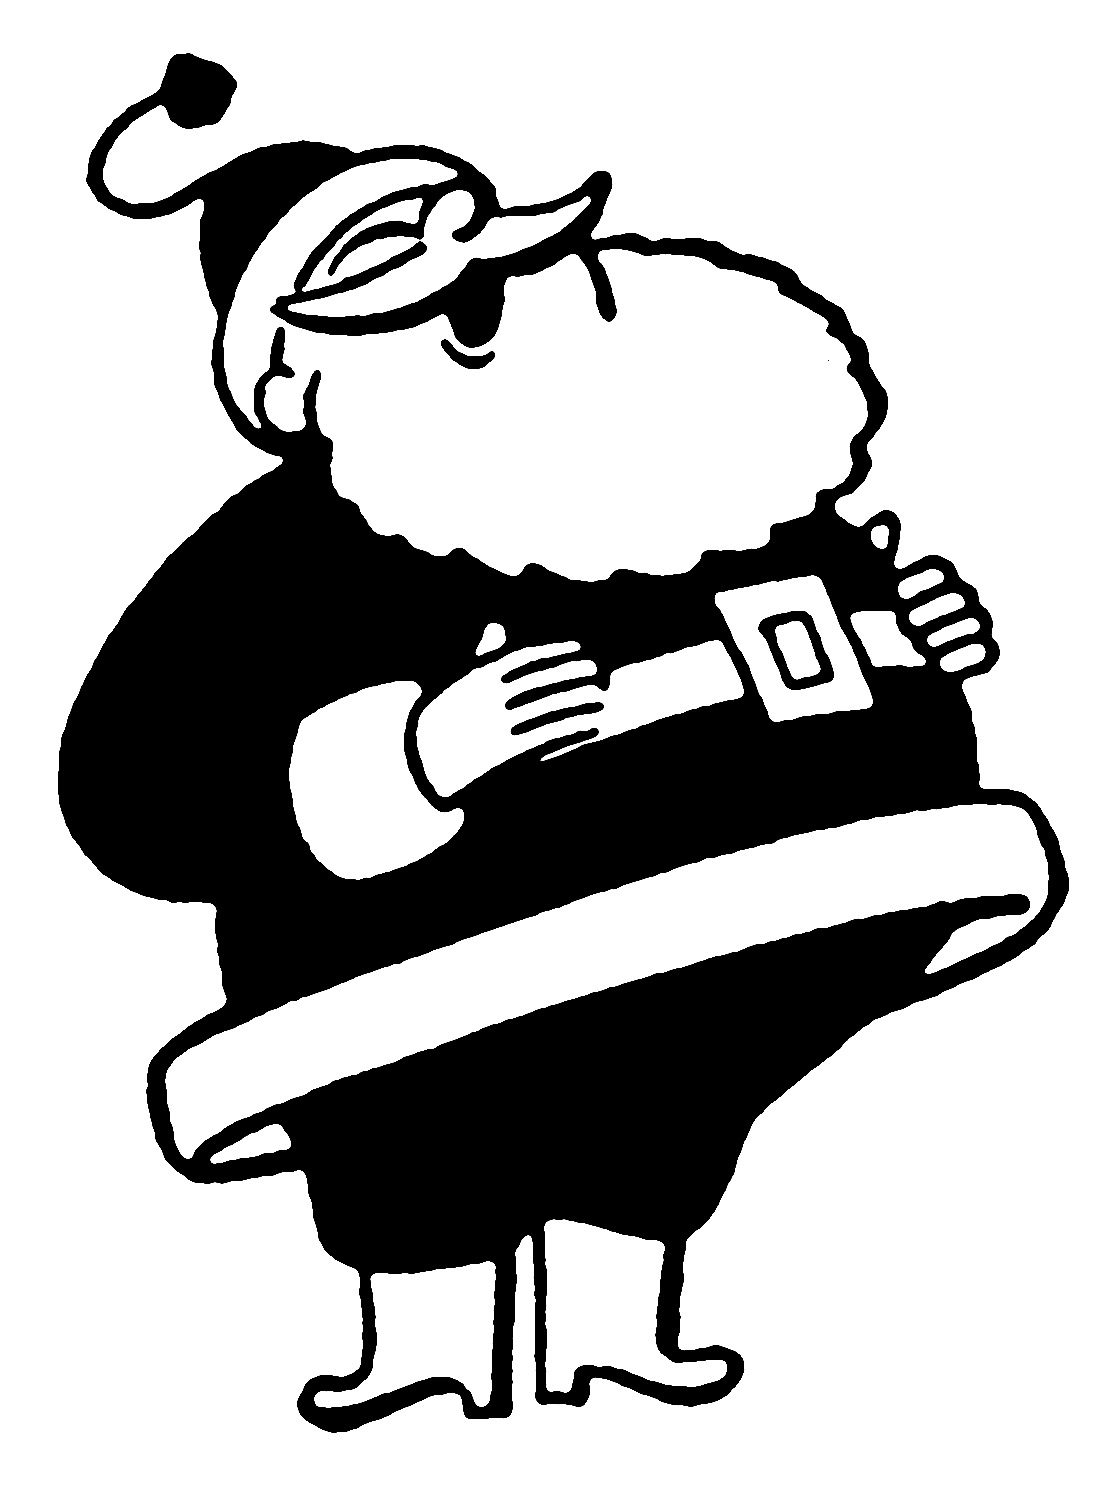 Funny Christmas Clip Art Black and White